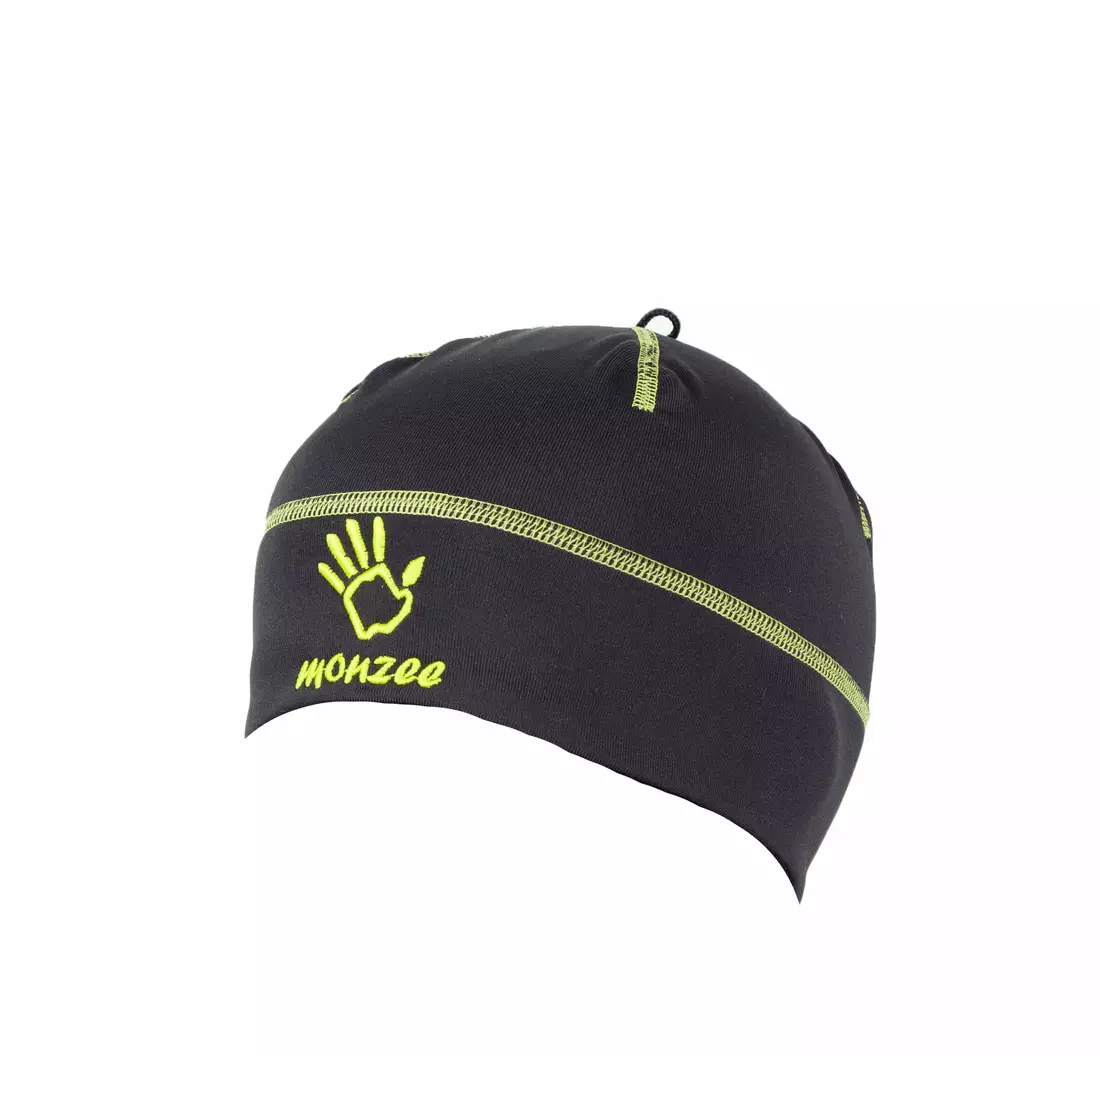 MONZEE - sports cap 14/01 C. black and green